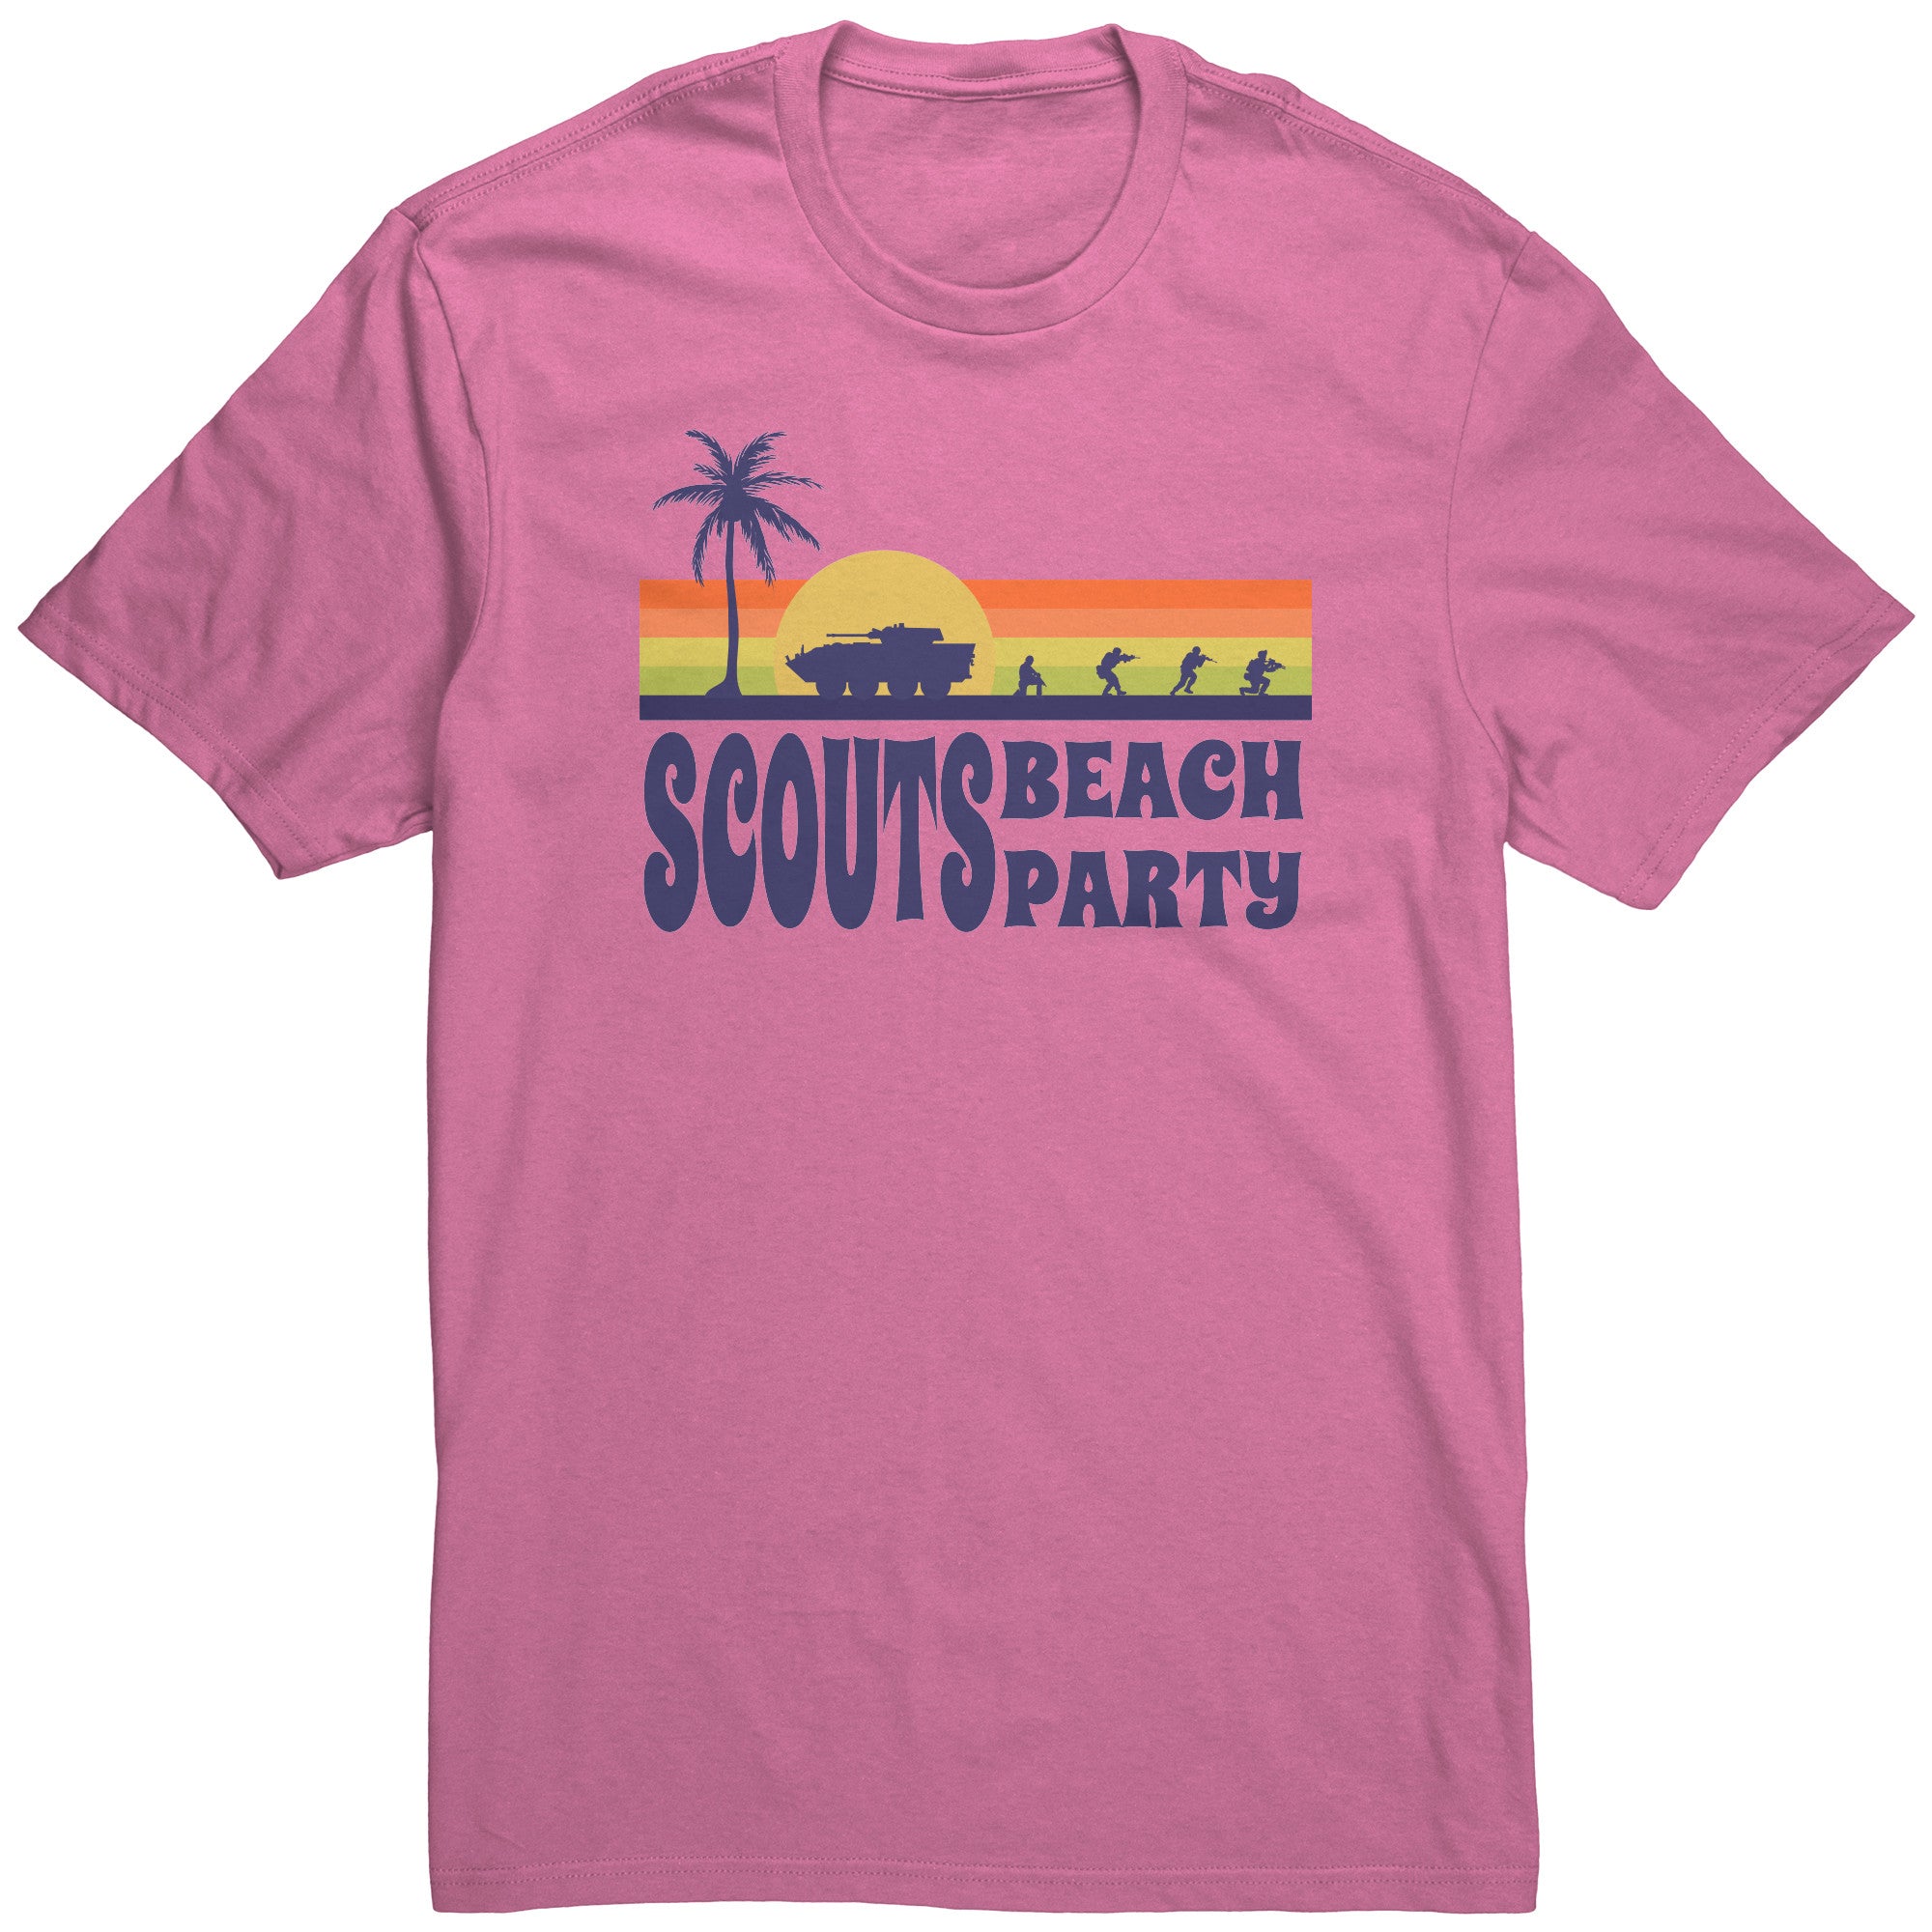 SCOUTS OUT BEACH PARTY CREW T-SHIRT